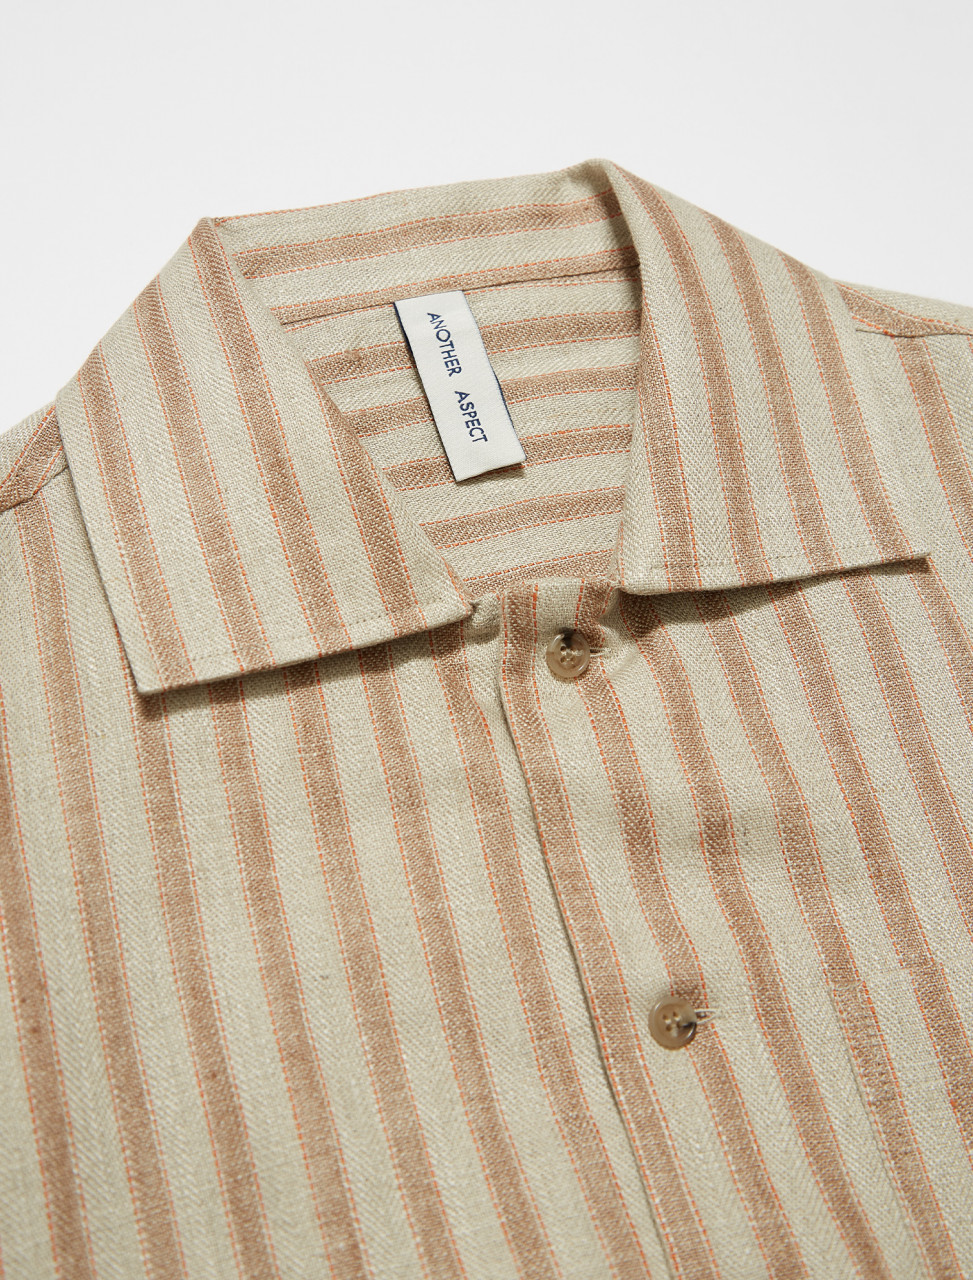 ANOTHER ASPECT ANOTHER Shirt 2.0 in Multi-Colour Stripe | Voo Store